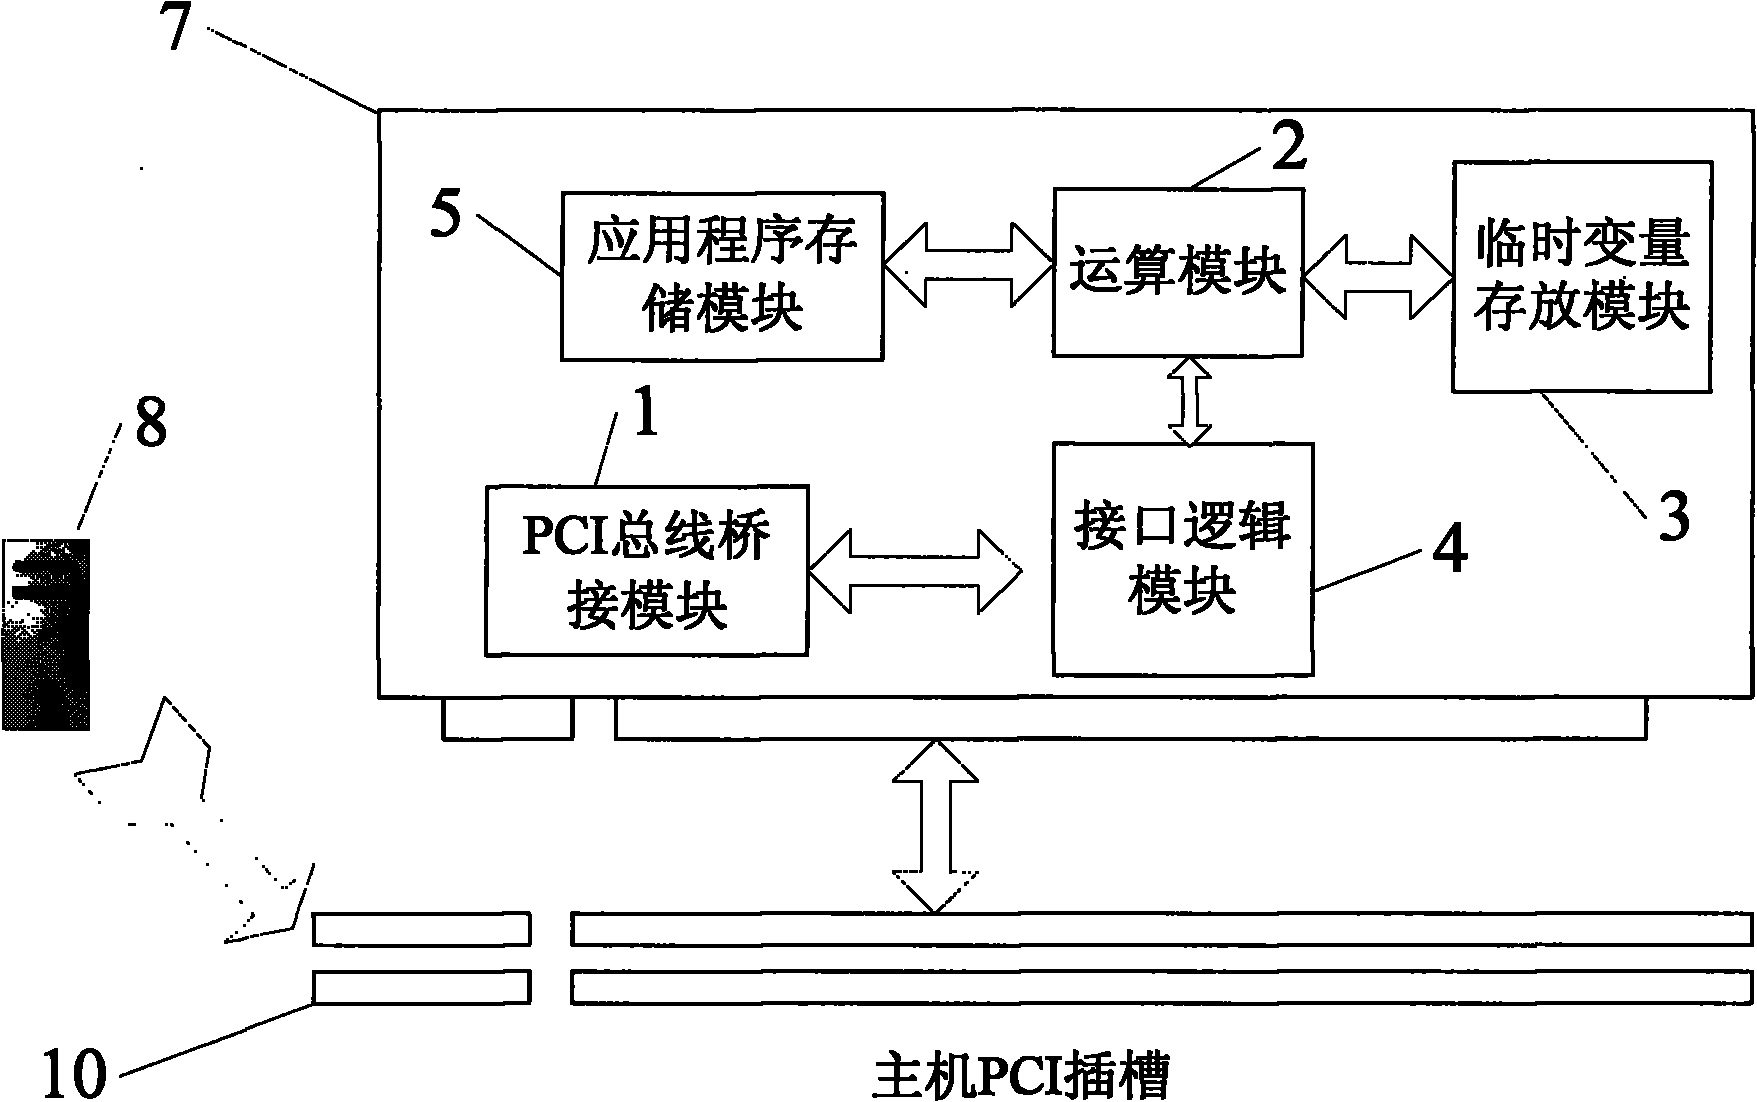 FPGA (Field Programmable Gate Array) high-performance operating PCI (Peripheral Component Interconnect) card